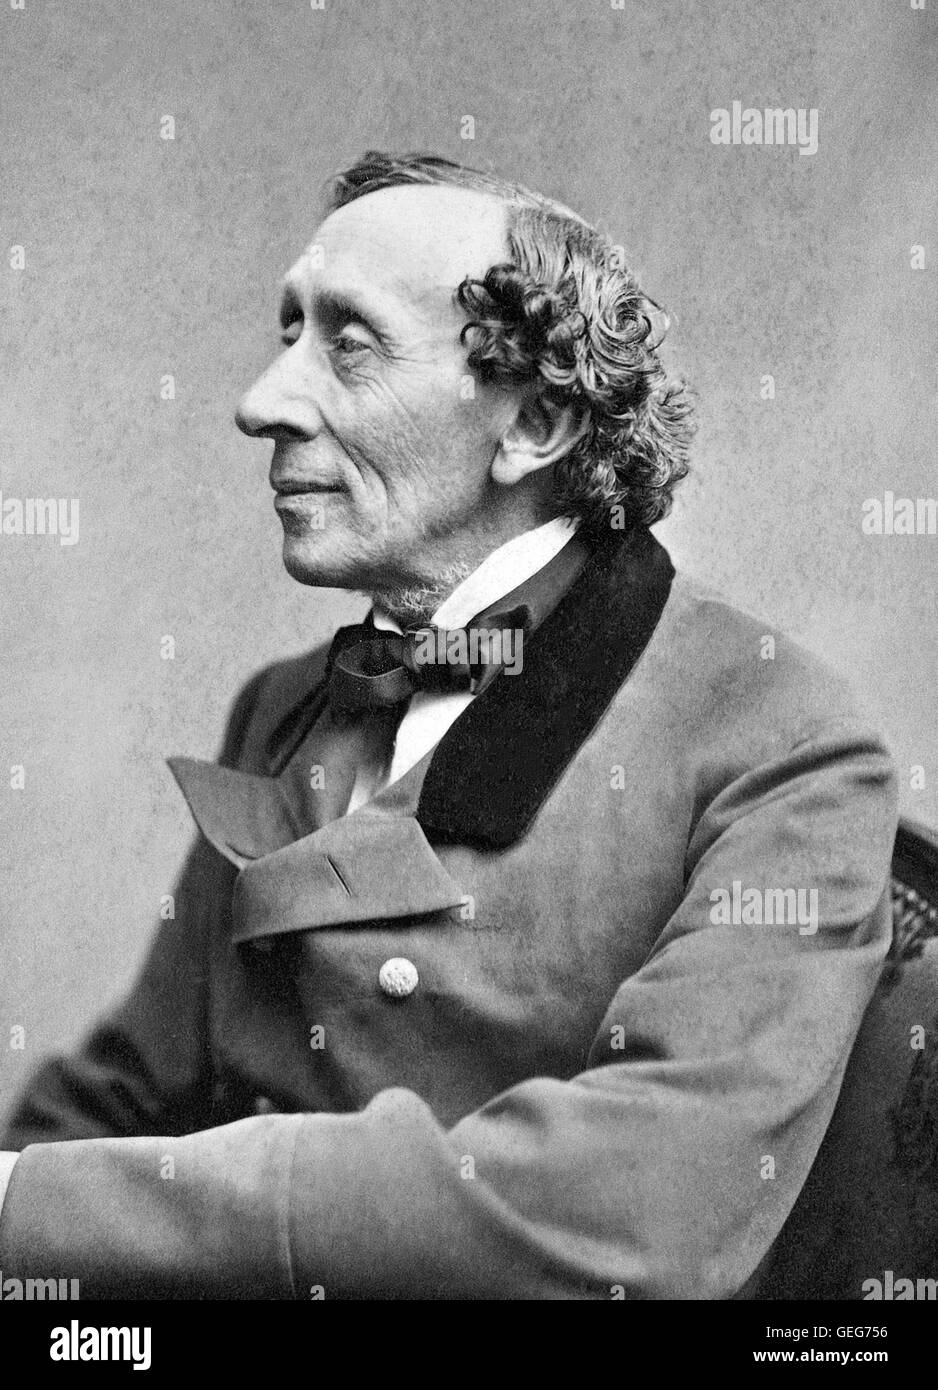 Hans Christian Andersen. Portrait of the Danish author, famous for his fairy tales, by Thora Hallager, 1869. Stock Photo